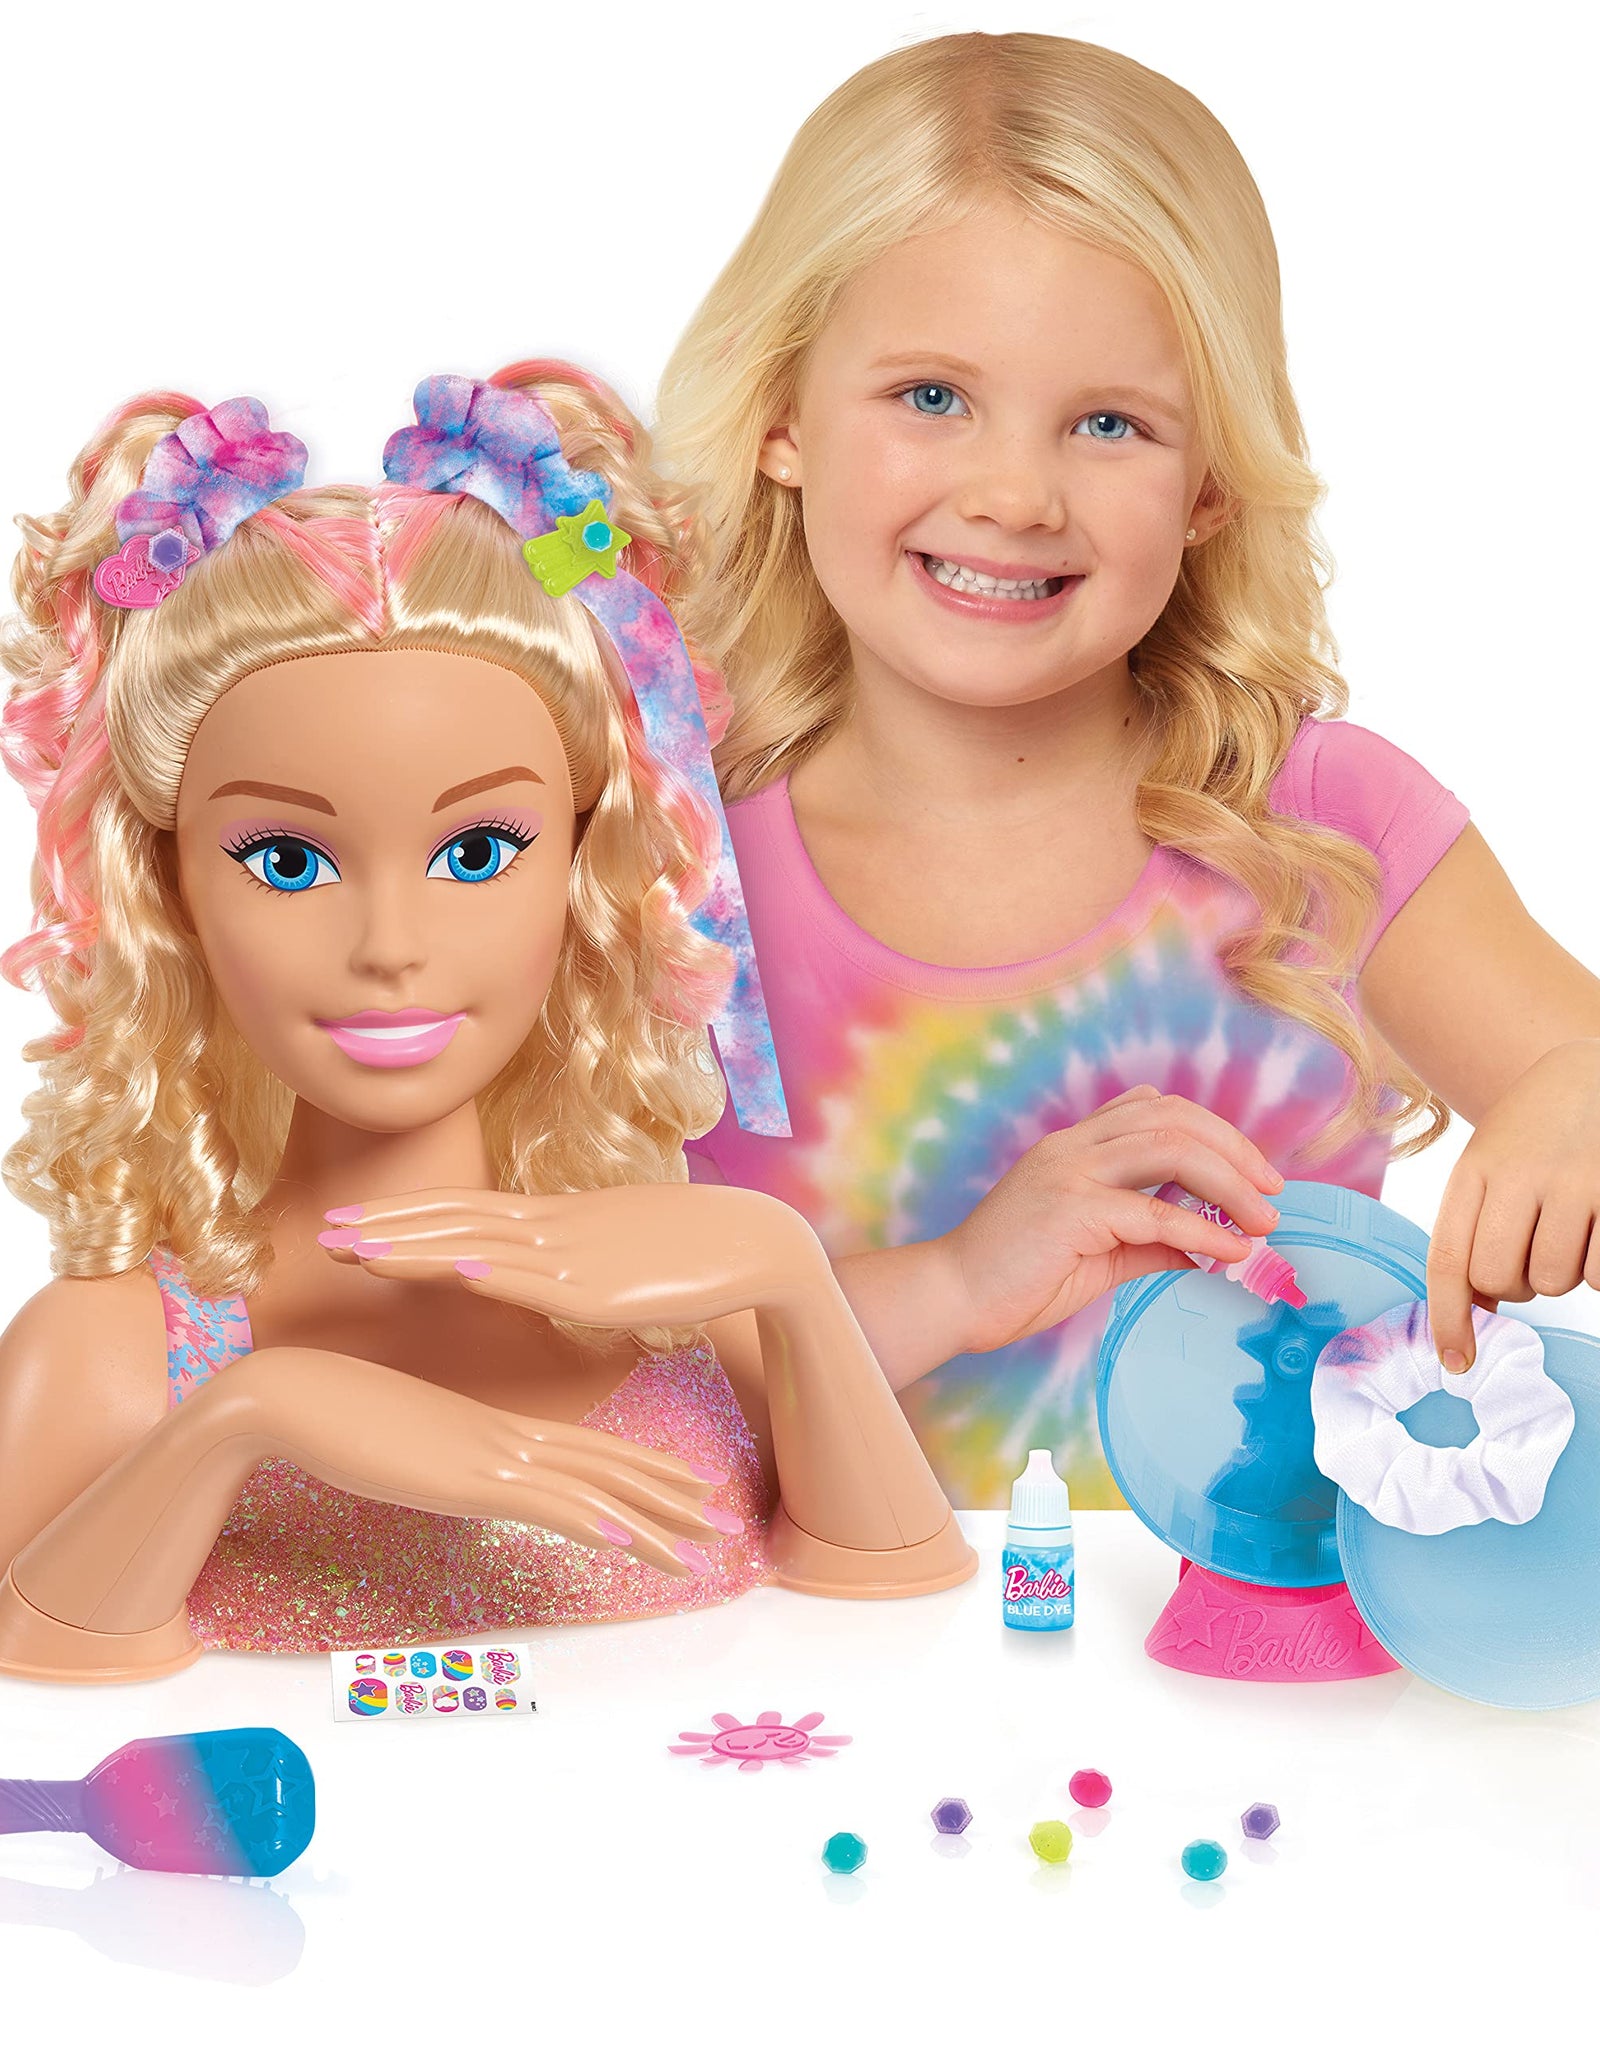 Barbie Tie-Dye Deluxe 22-Piece Styling Head, Blonde Hair, Includes 2 Non-Toxic Dye Colors, by Just Play